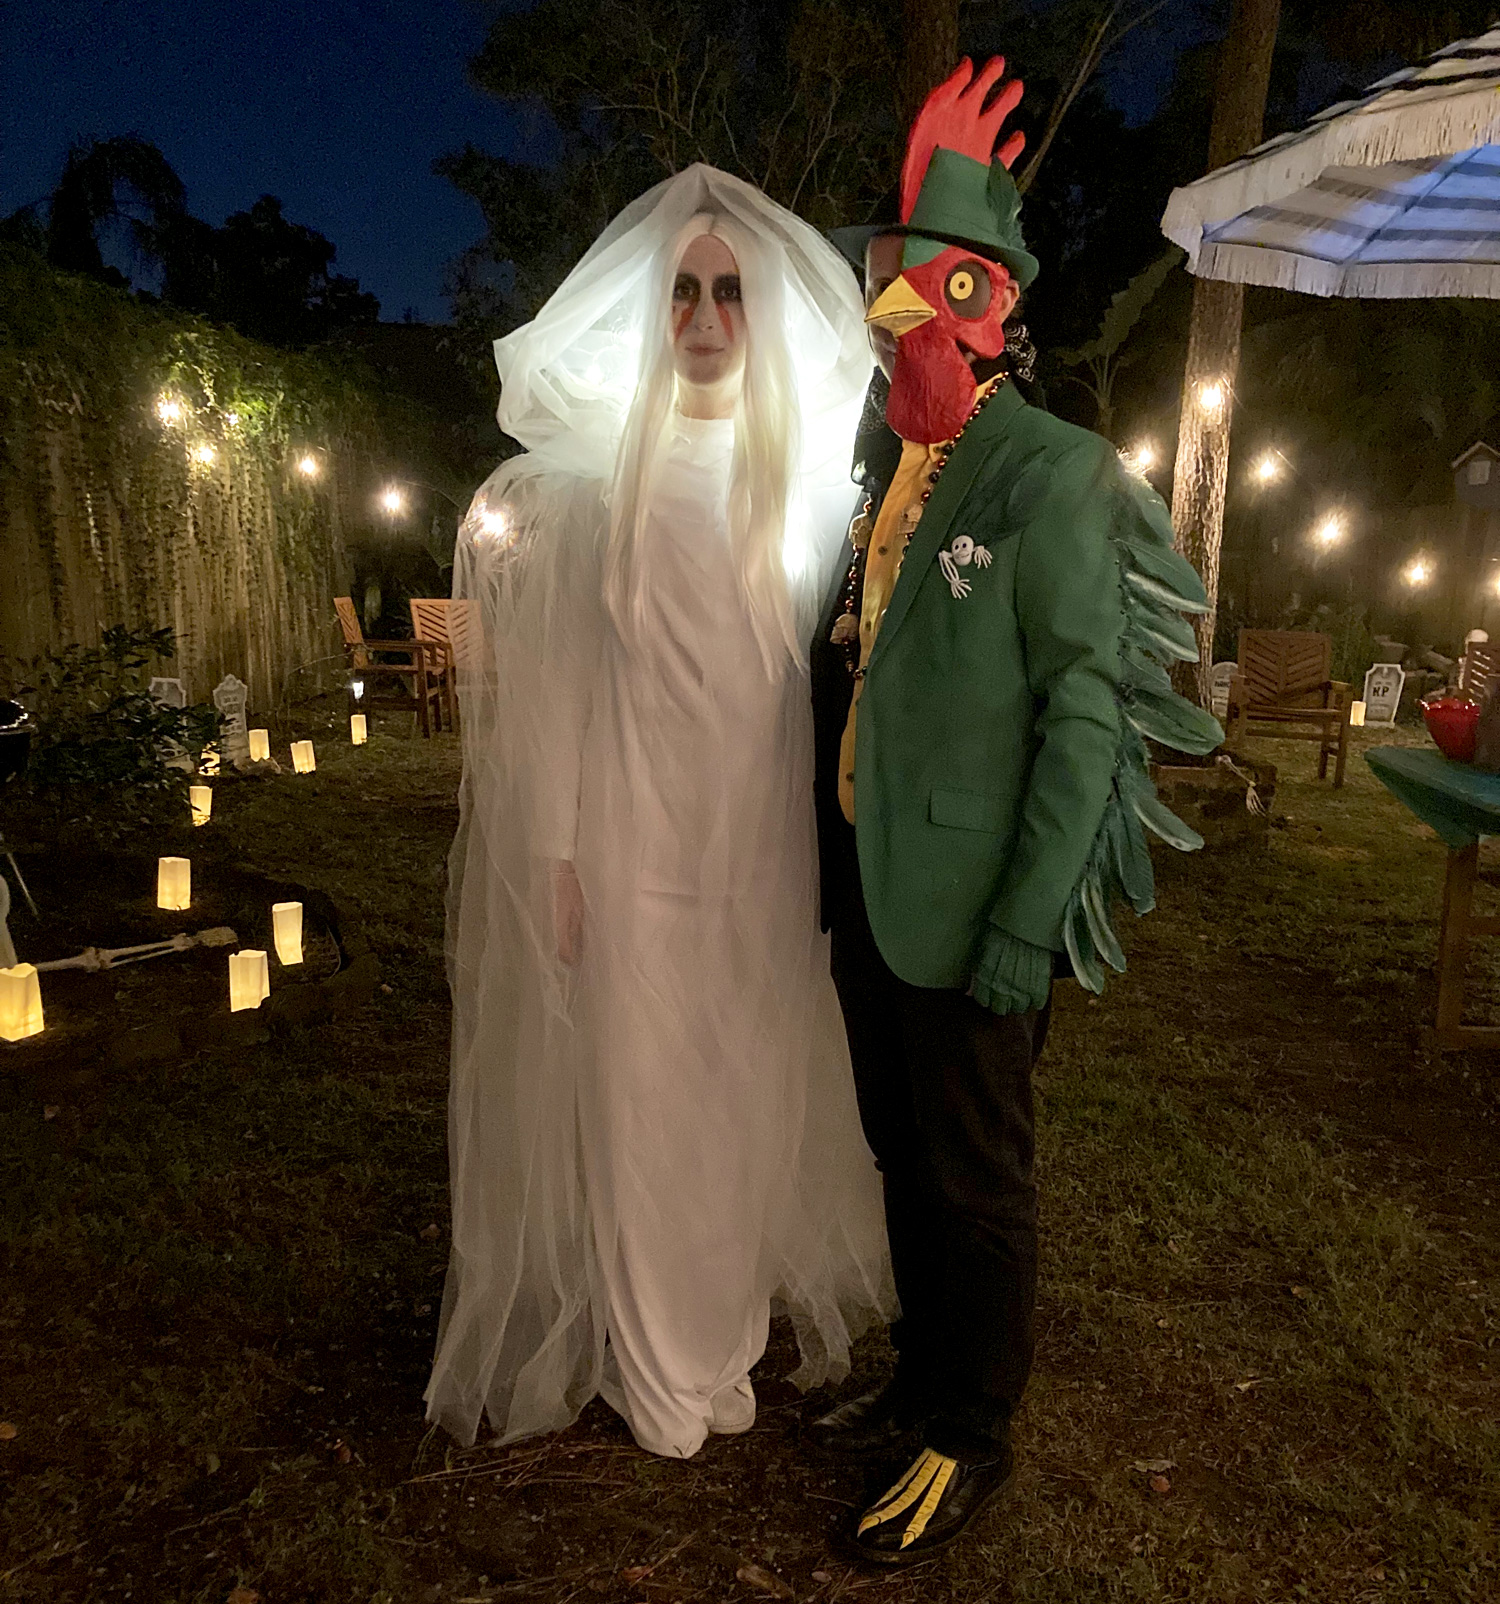 La Dame Blanche and the Rooster Man Halloween costumes